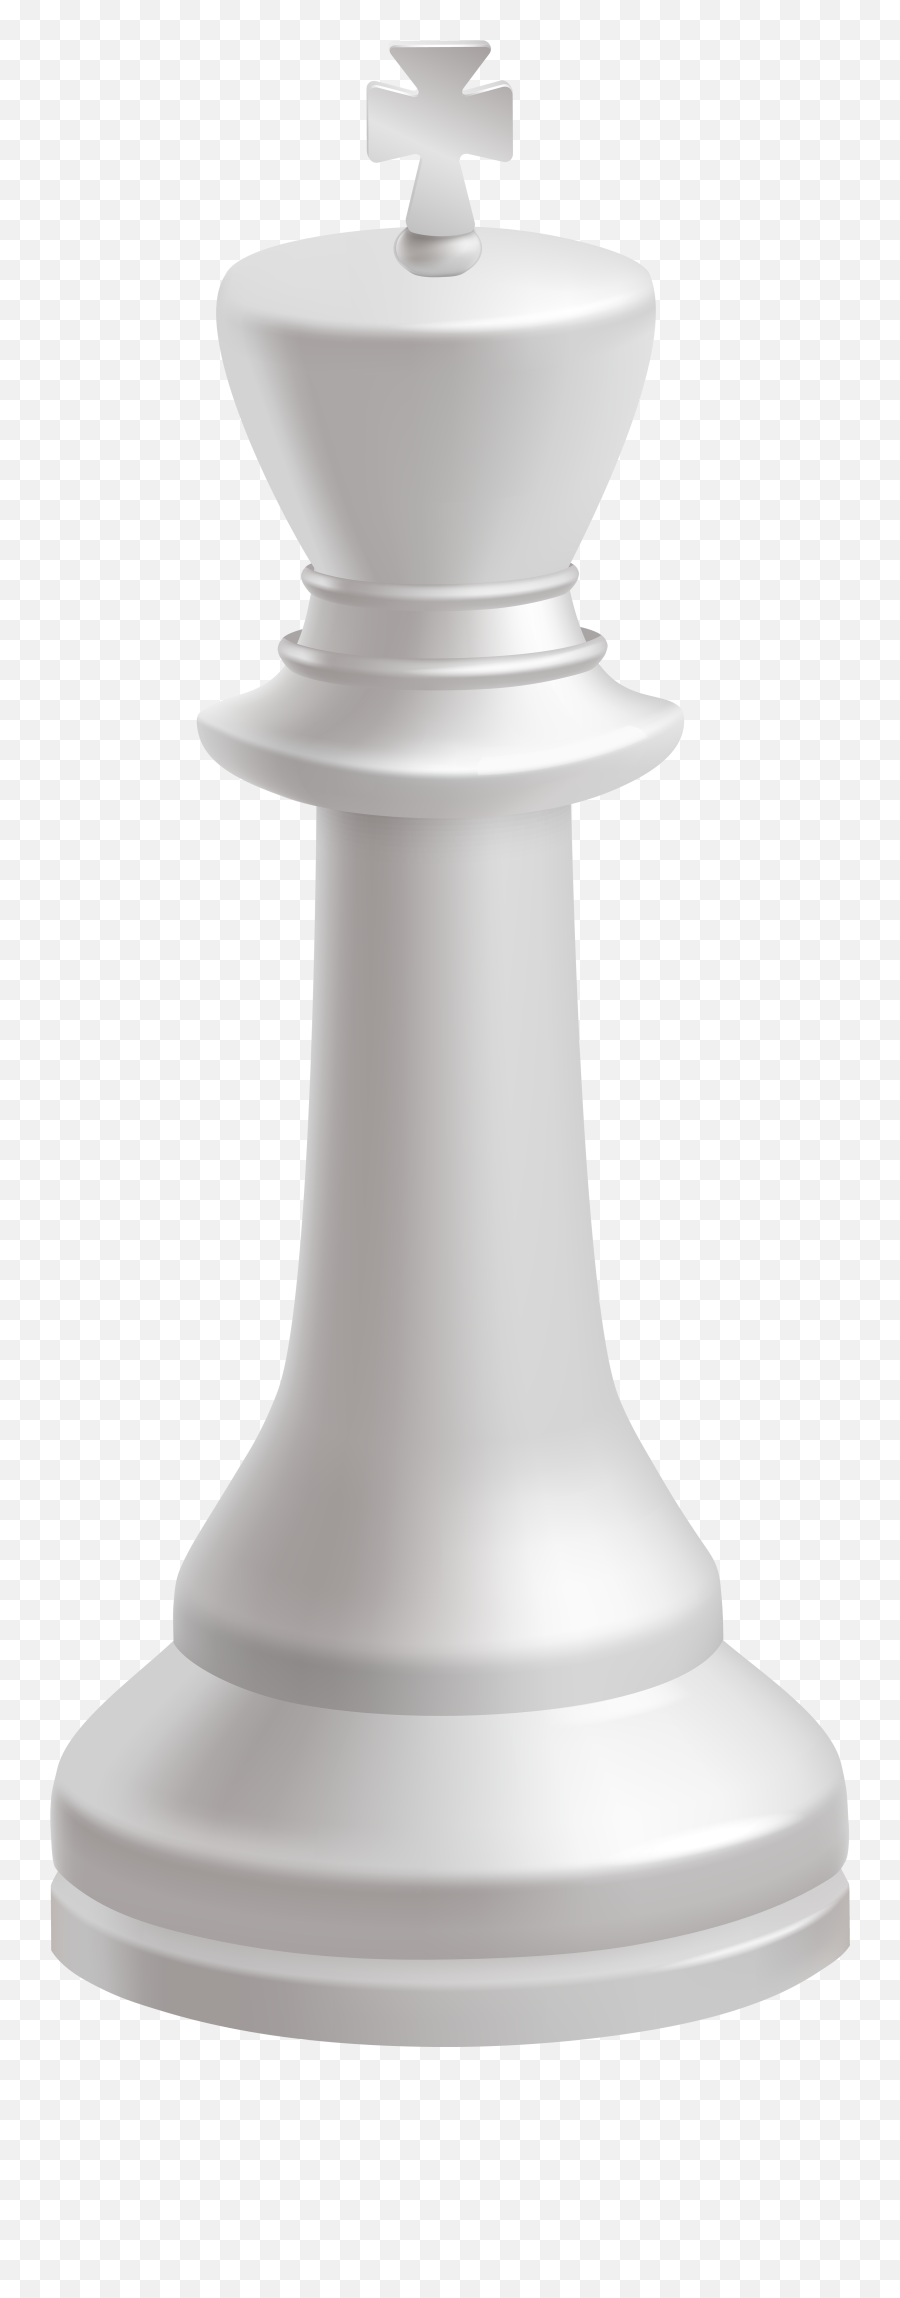 King White Chess Piece Png Clip Art - Solid,Black King Chess Icon